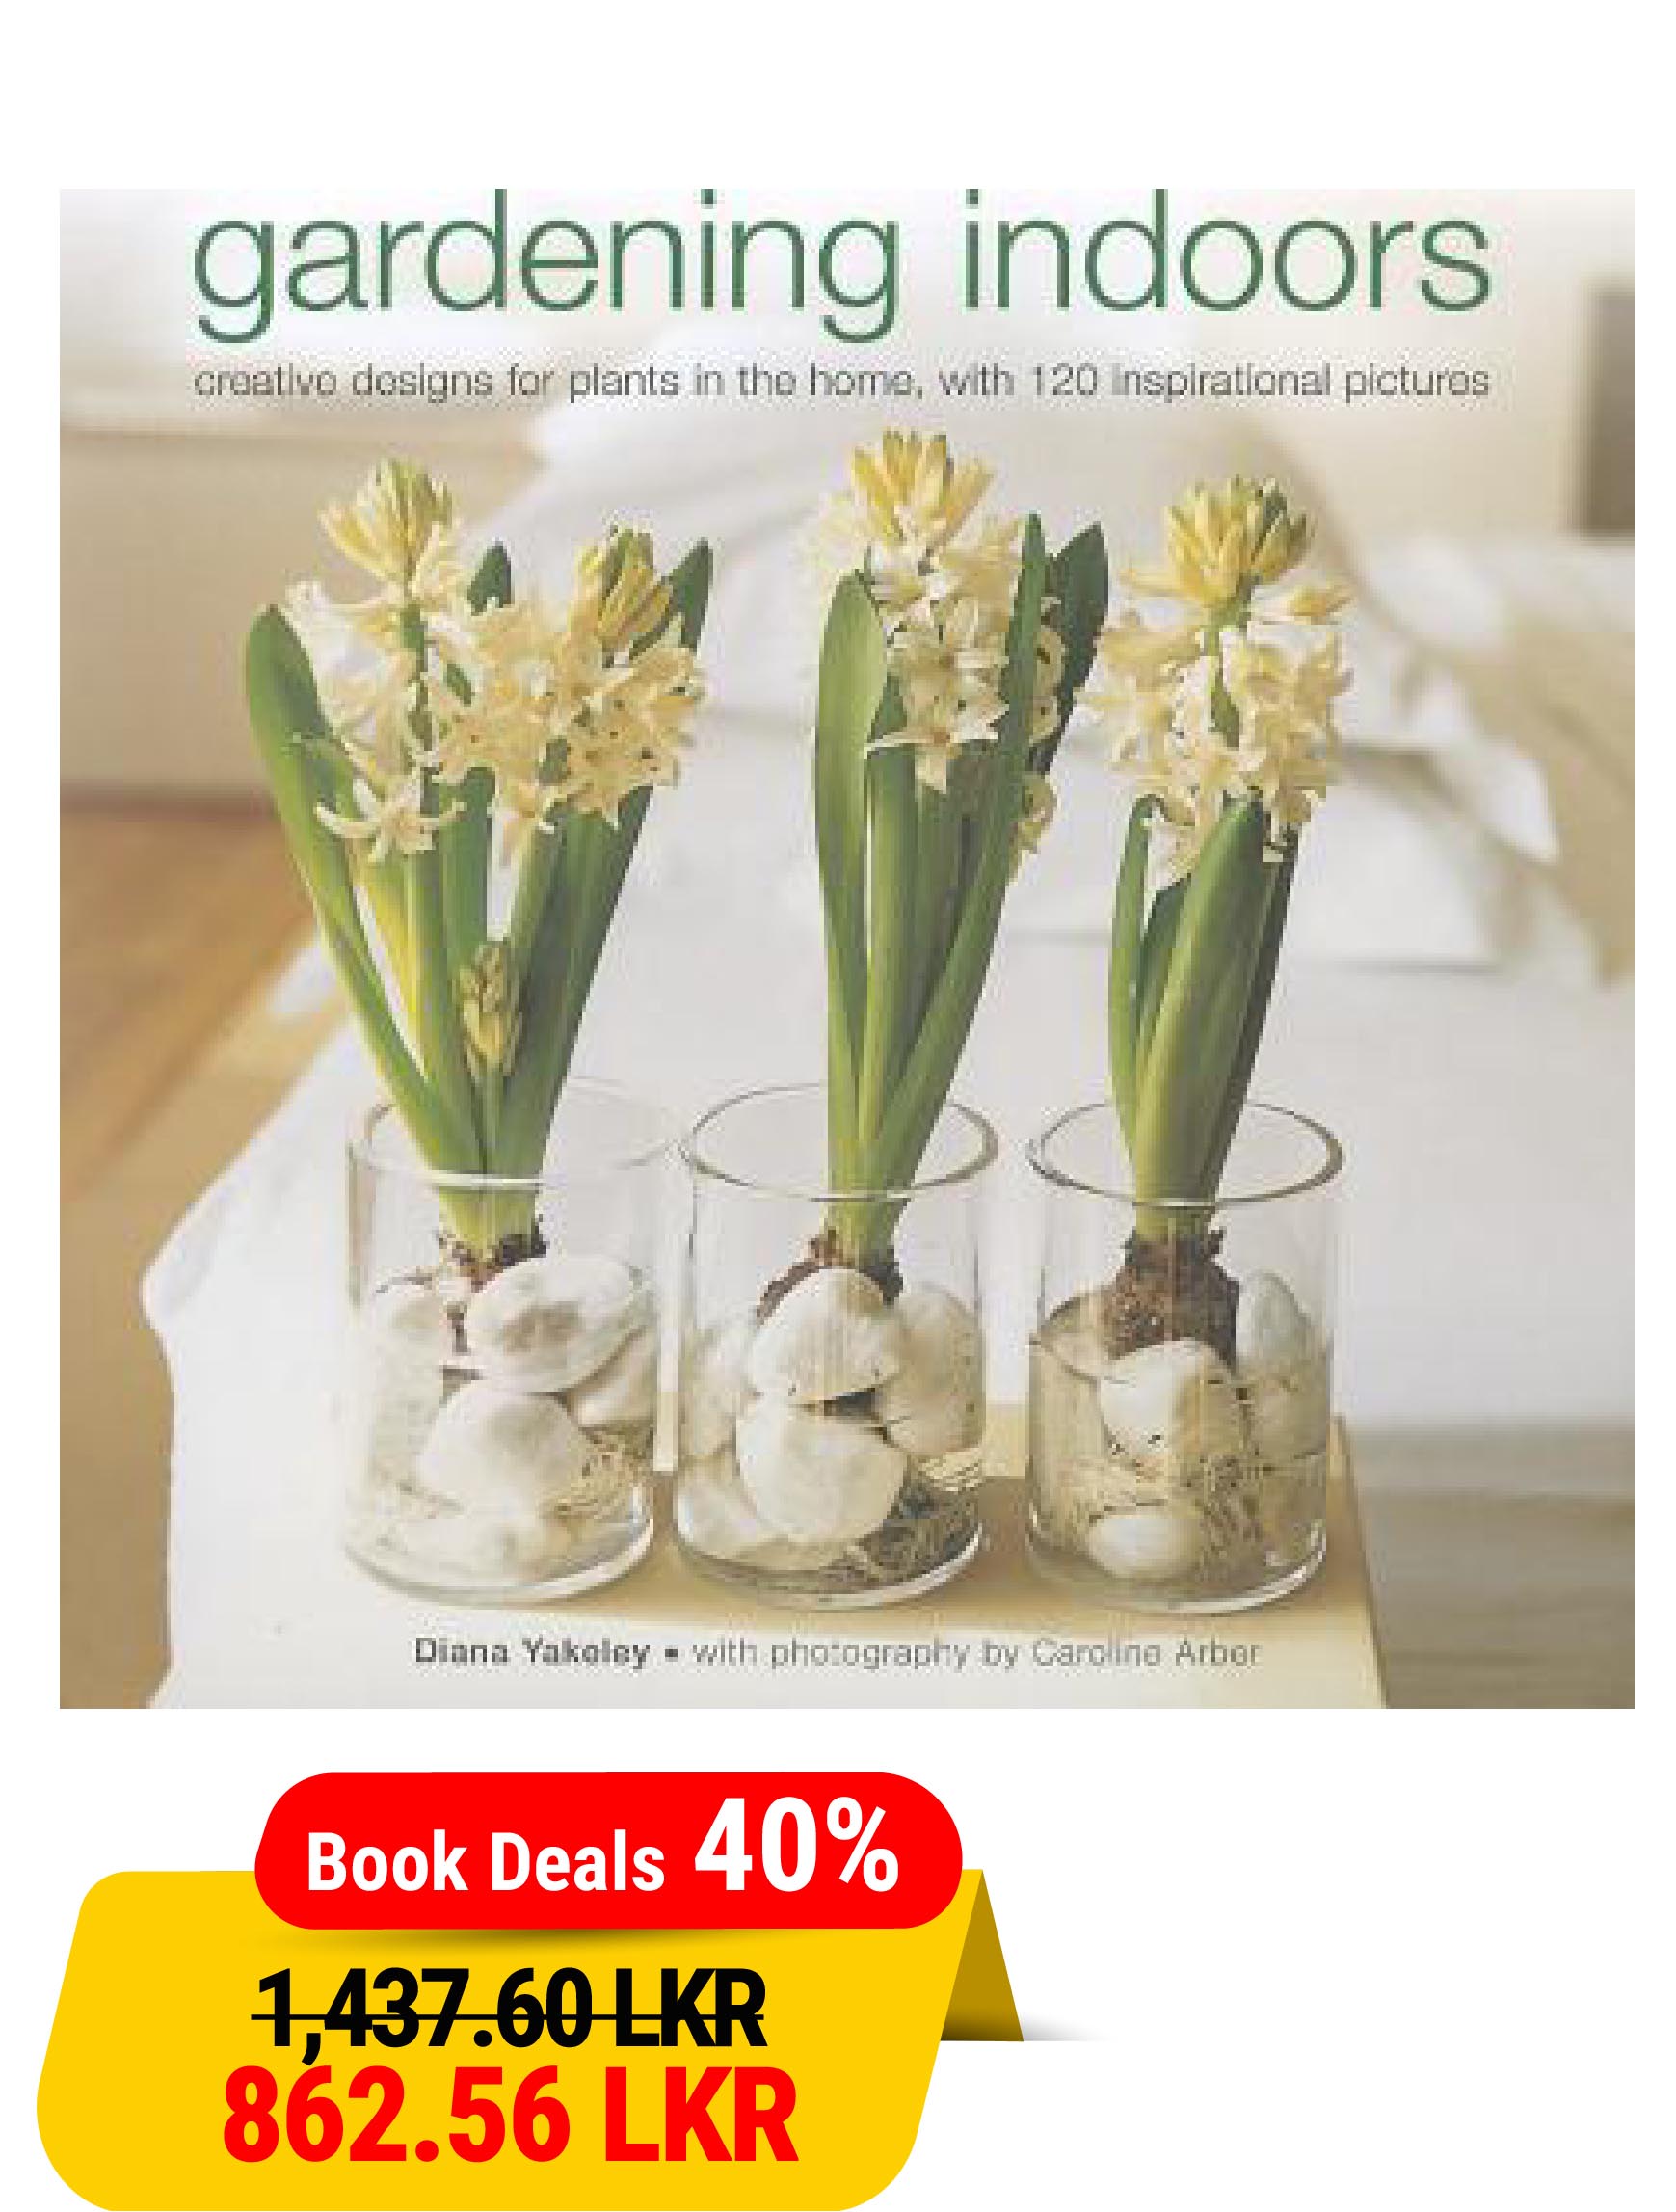 Gardening Indoors: Creative designs for plants in the home, with 120 inspirational pictures